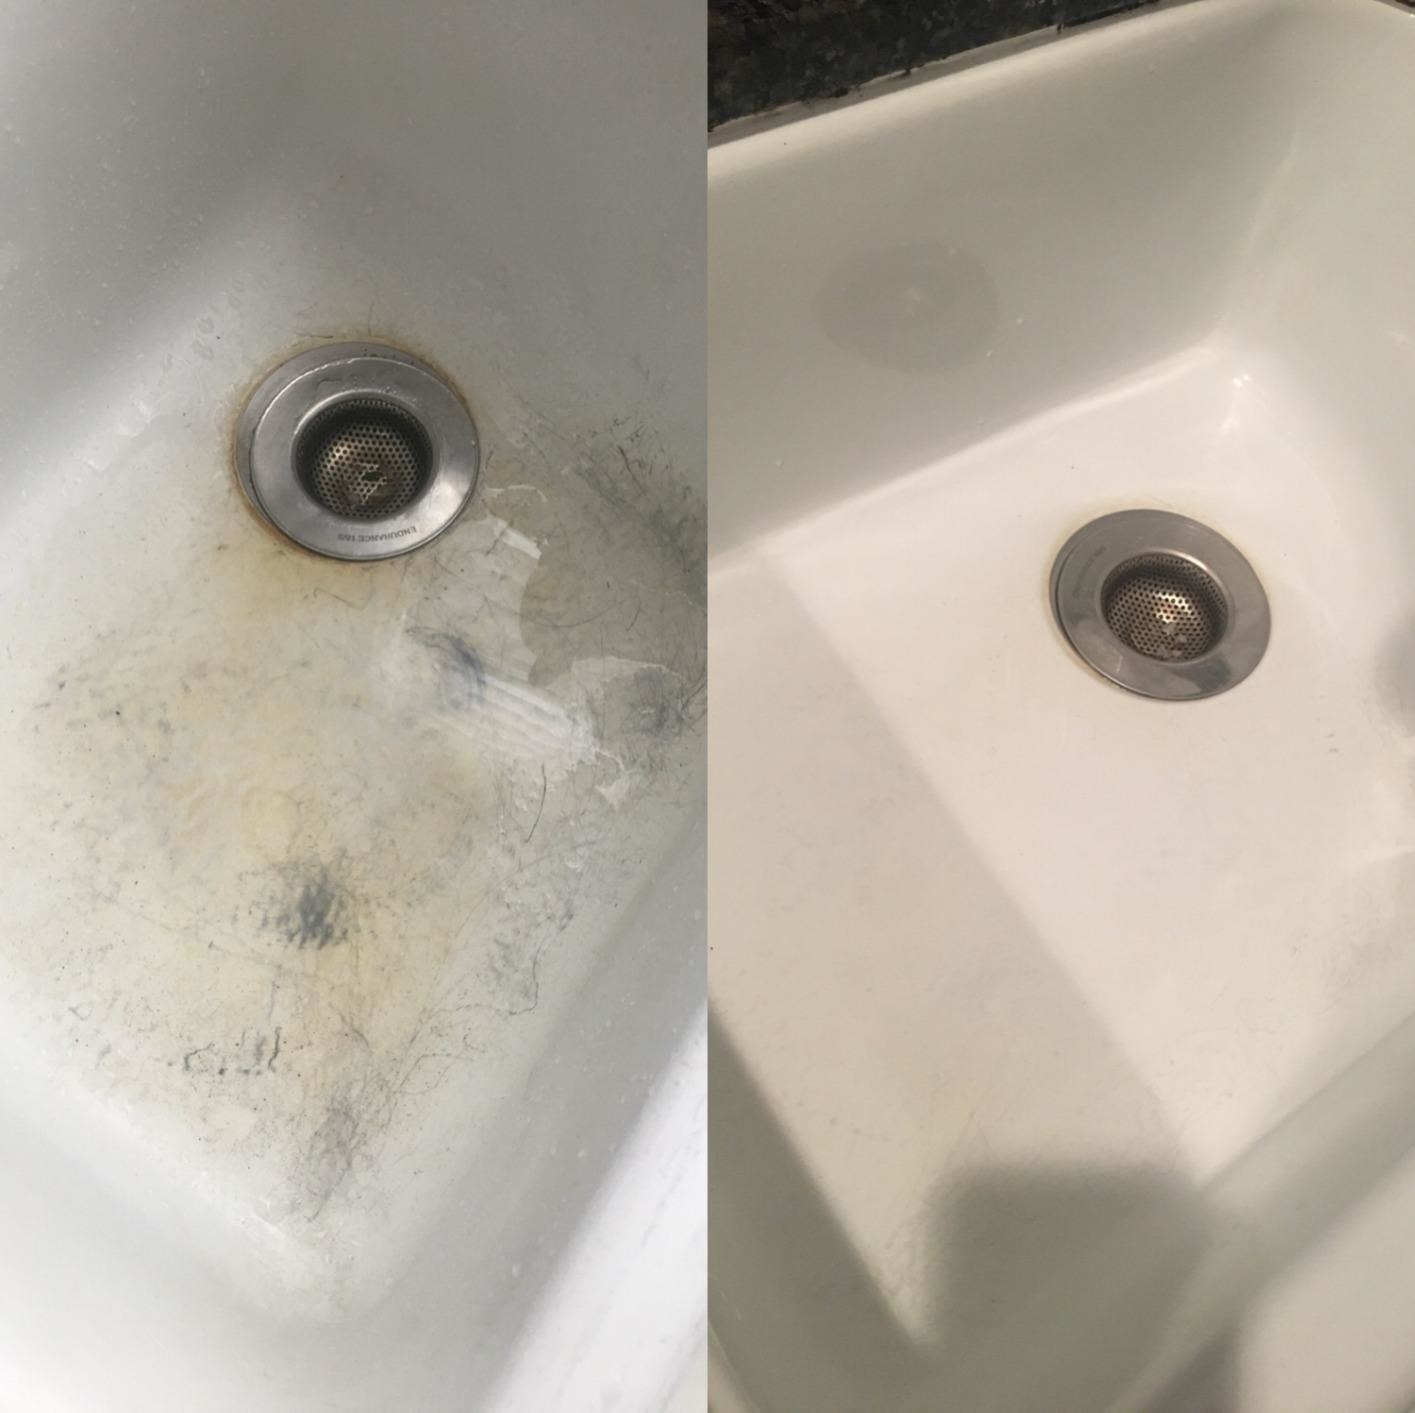 A reviewer&#x27;s sink: on the left with grey scuffs and staining, on the right clean and almost new looking